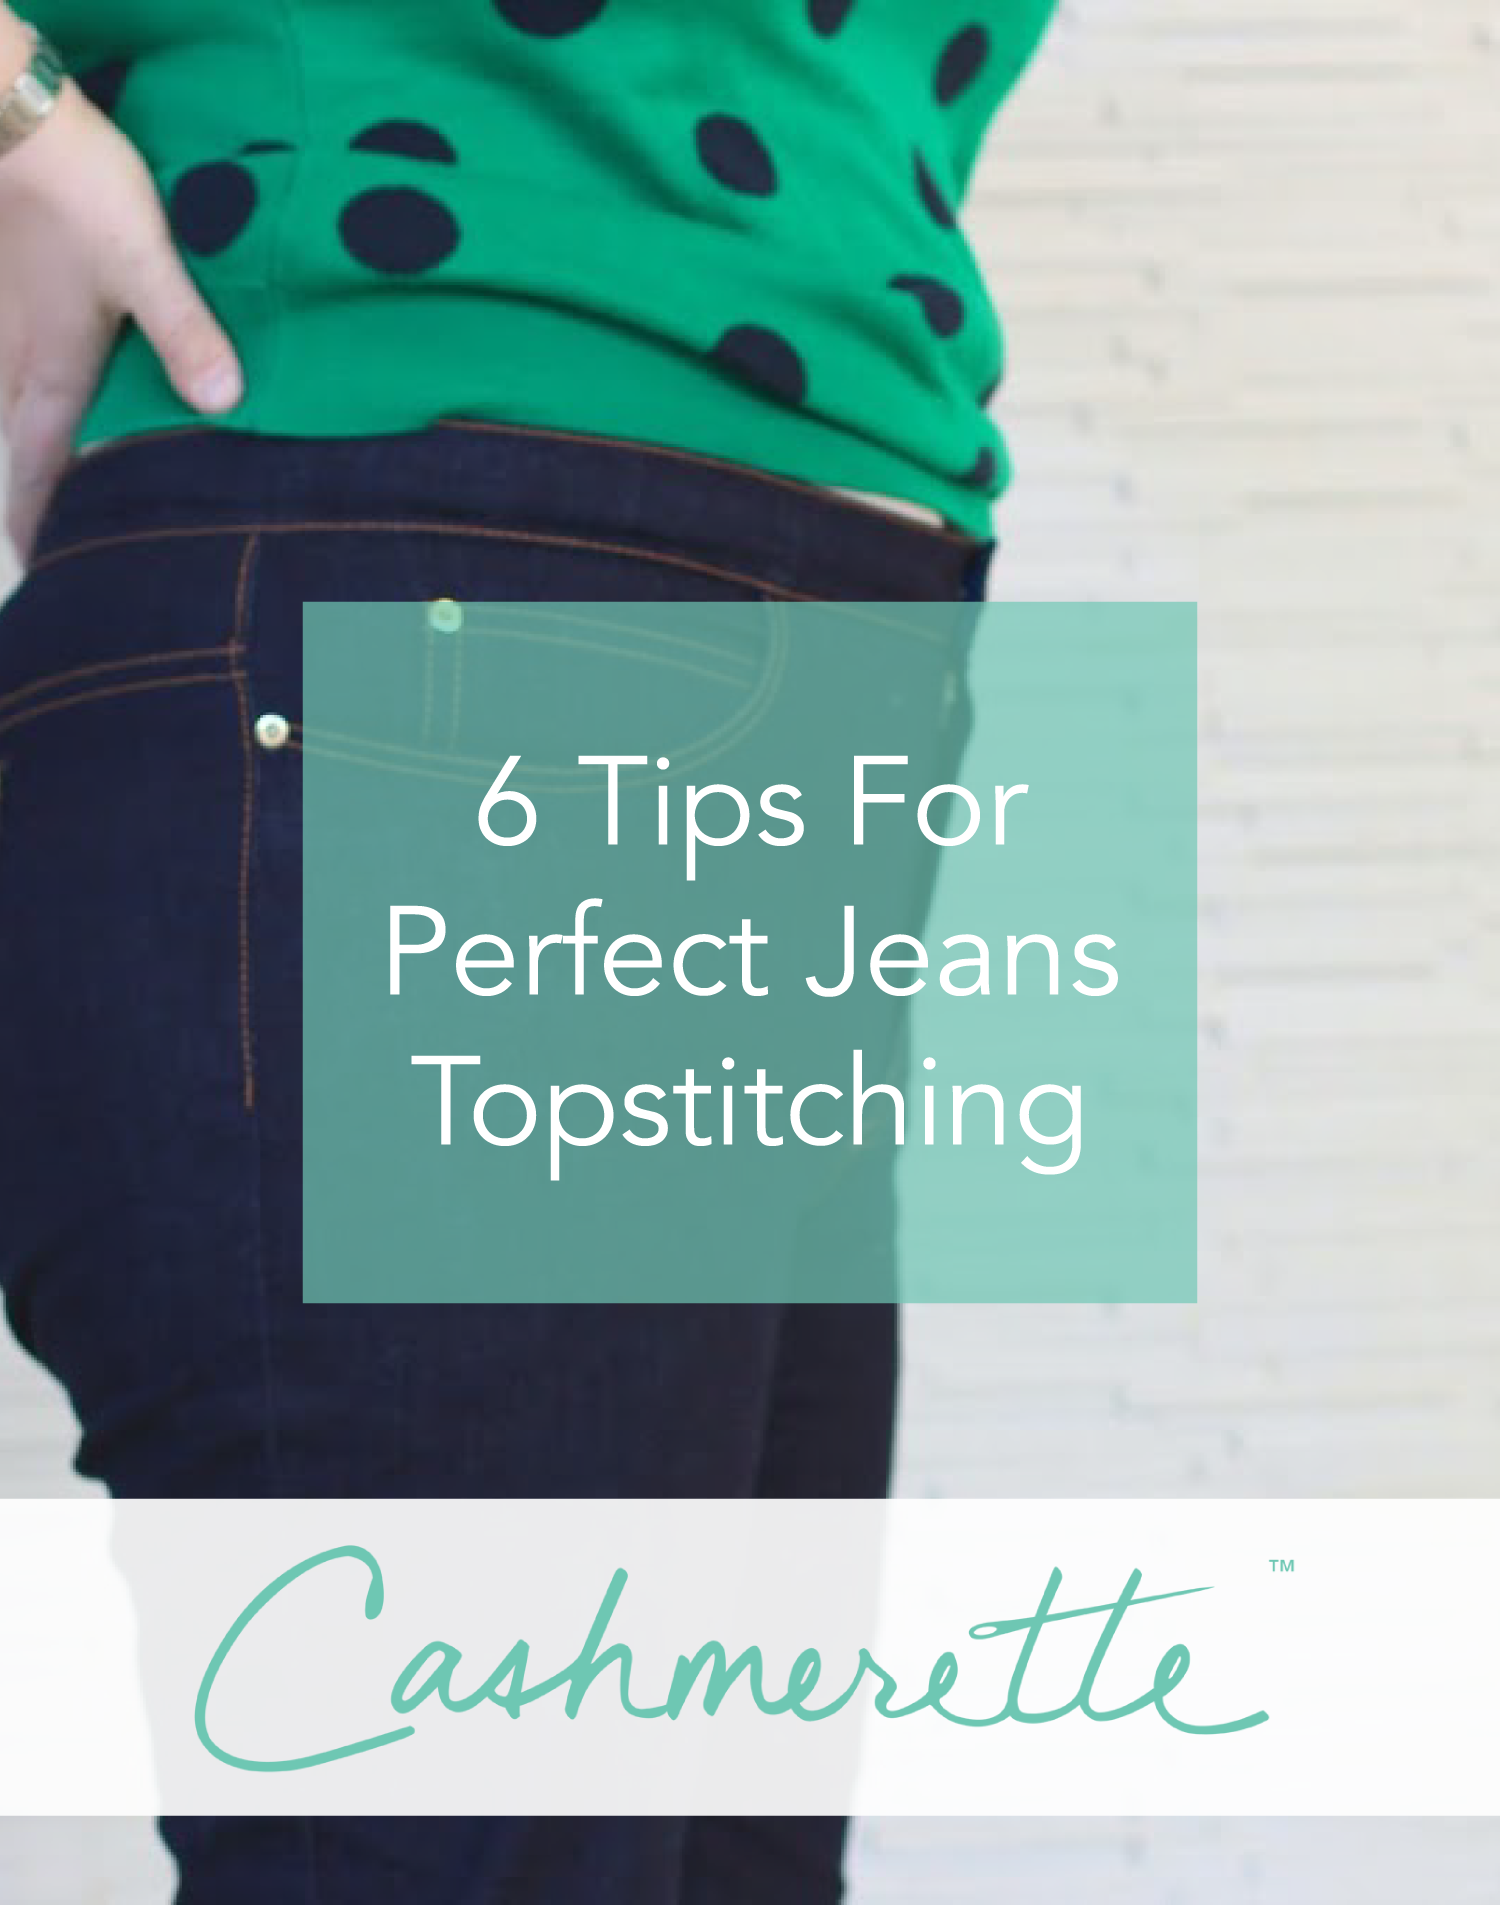 10 Tips for Sewing Jeans